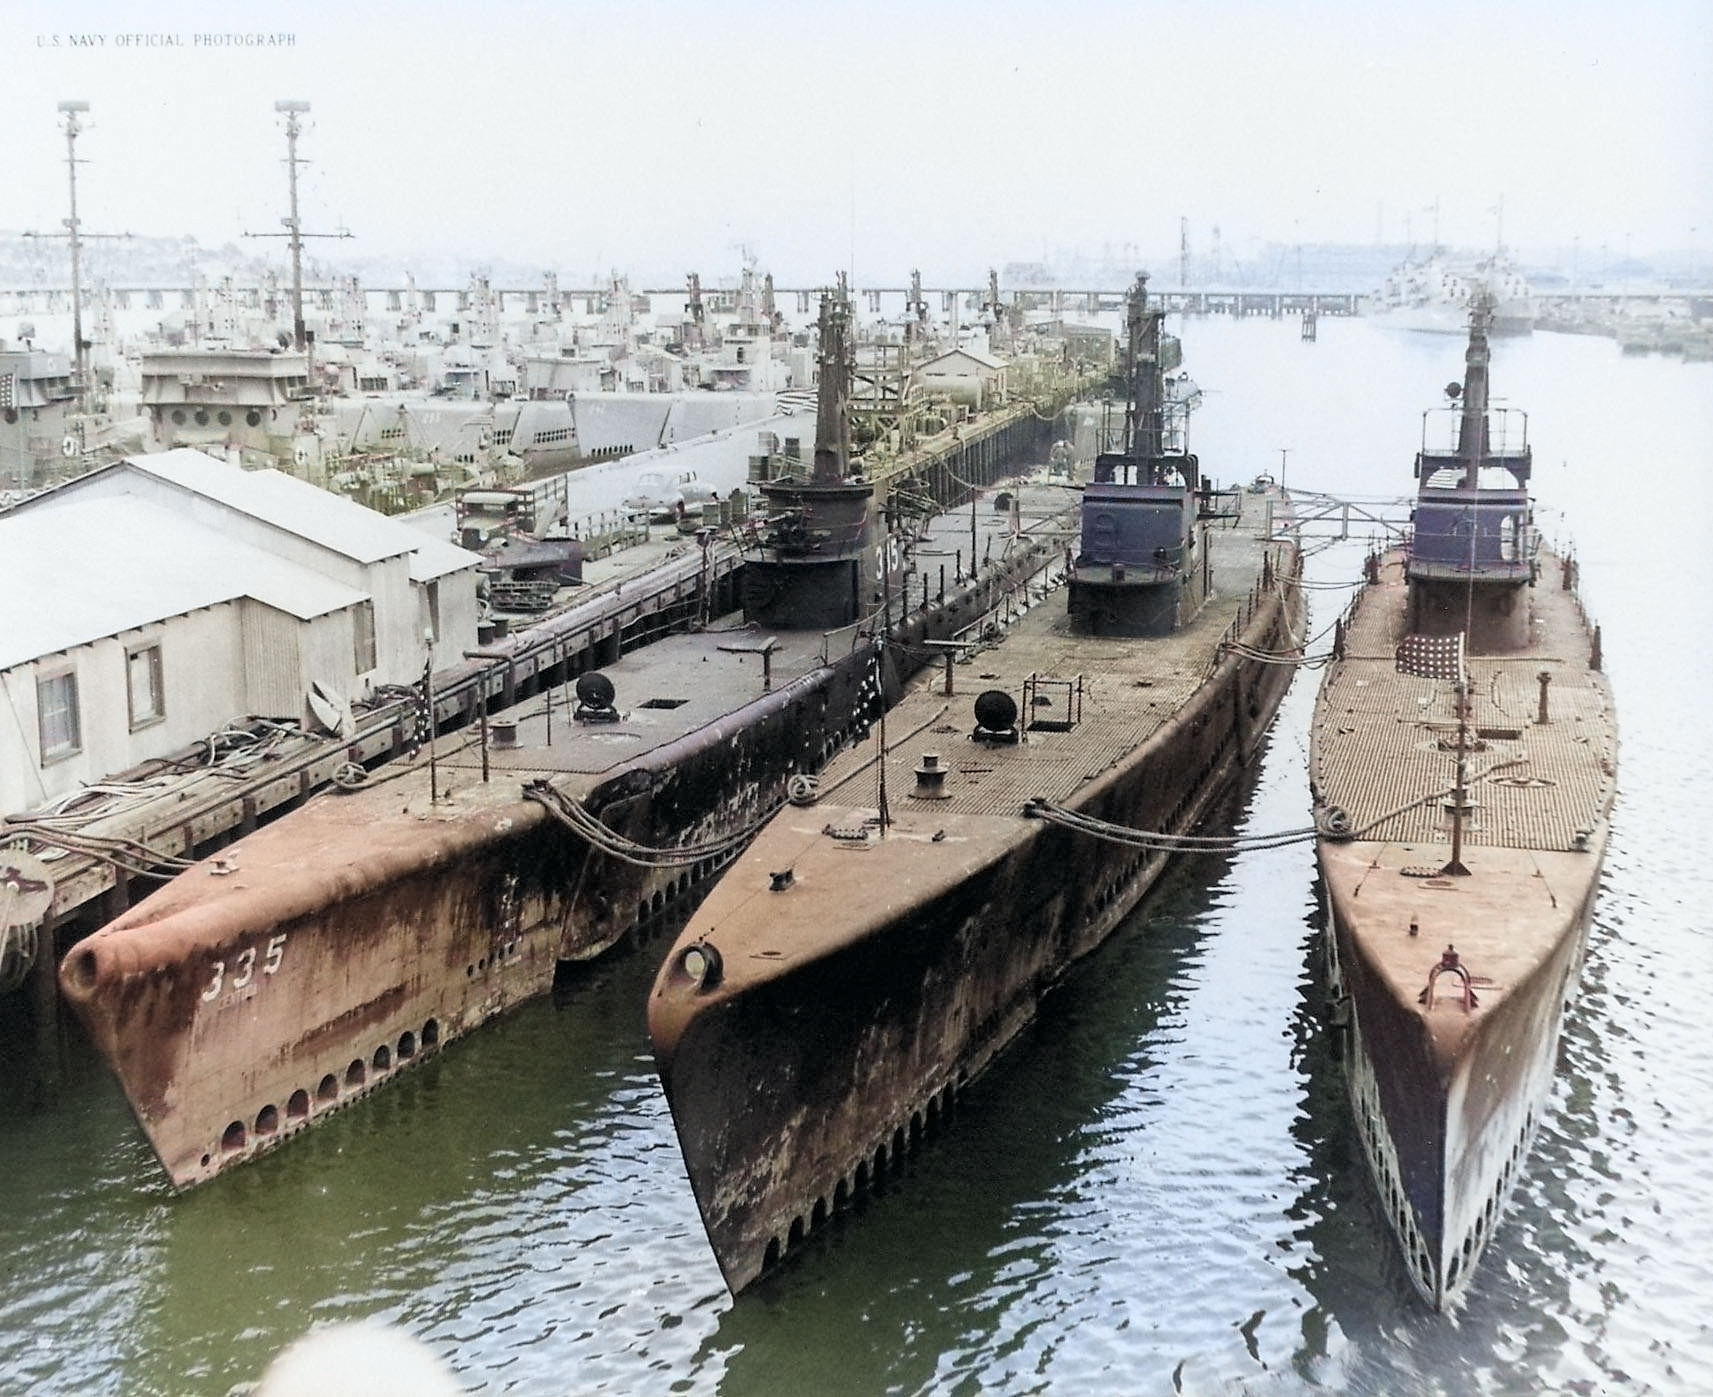 USS Dentuda, USS Searaven, and USS Tuna in foreground, with USS Parche, USS Bluegill, and USS Hackleback also present, at Mare Island Naval Shipyard, Vallejo, California, United States, 17 Oct 1946 [Colorized by WW2DB]